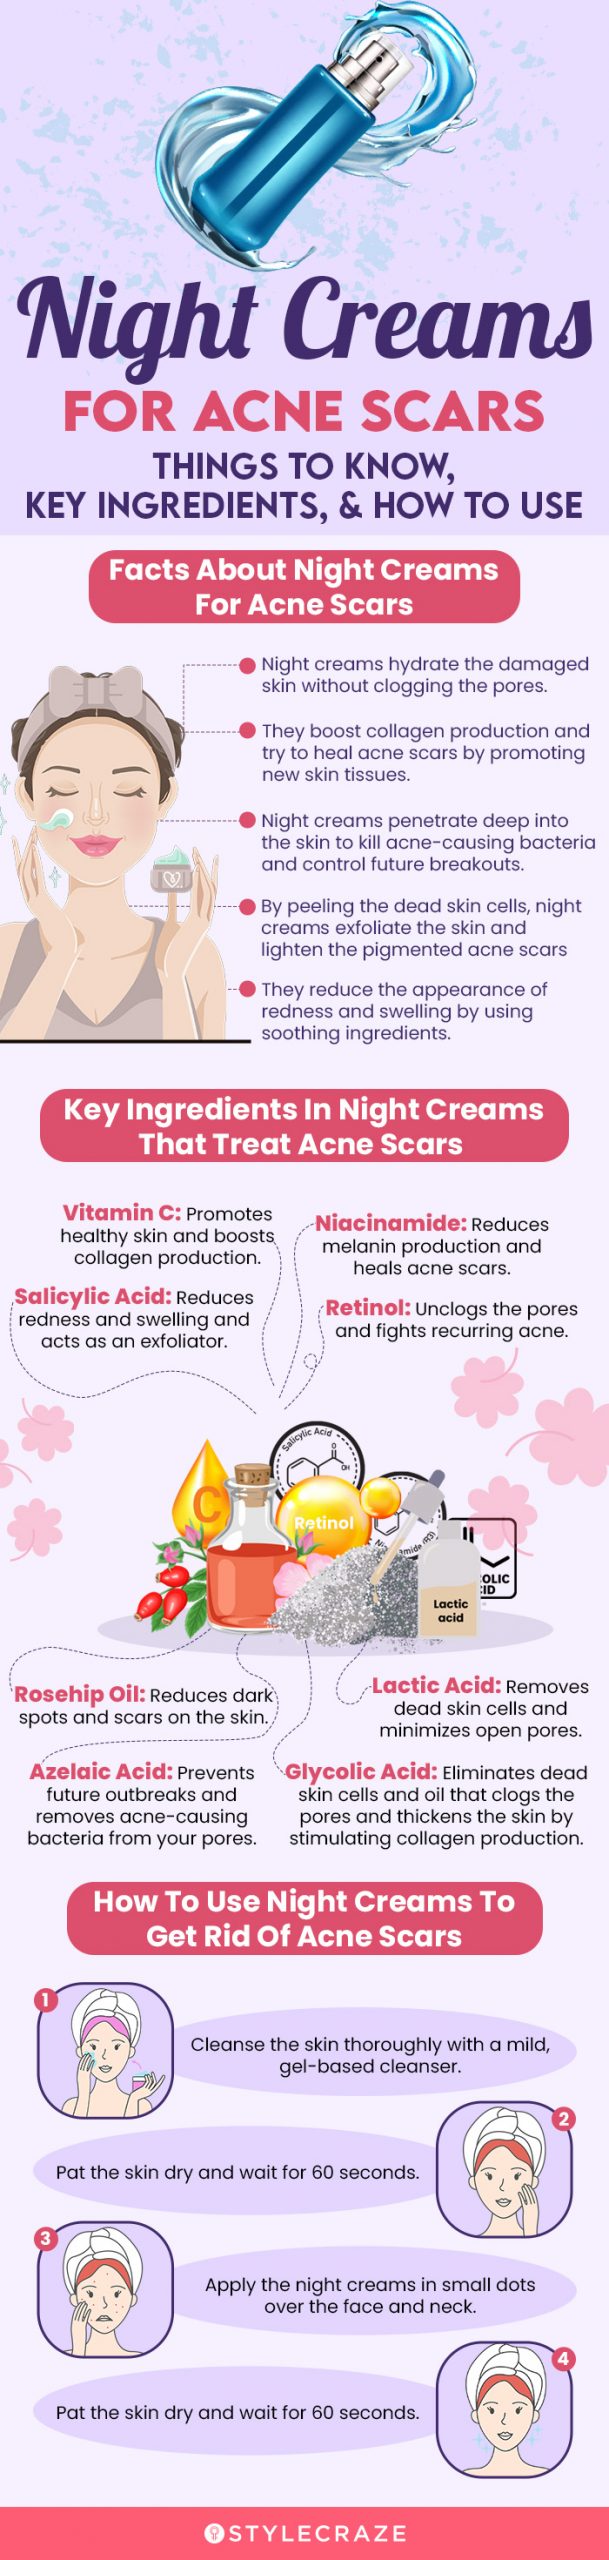 Night Creams For Acne Scars: Things To Know, Key Ingredients